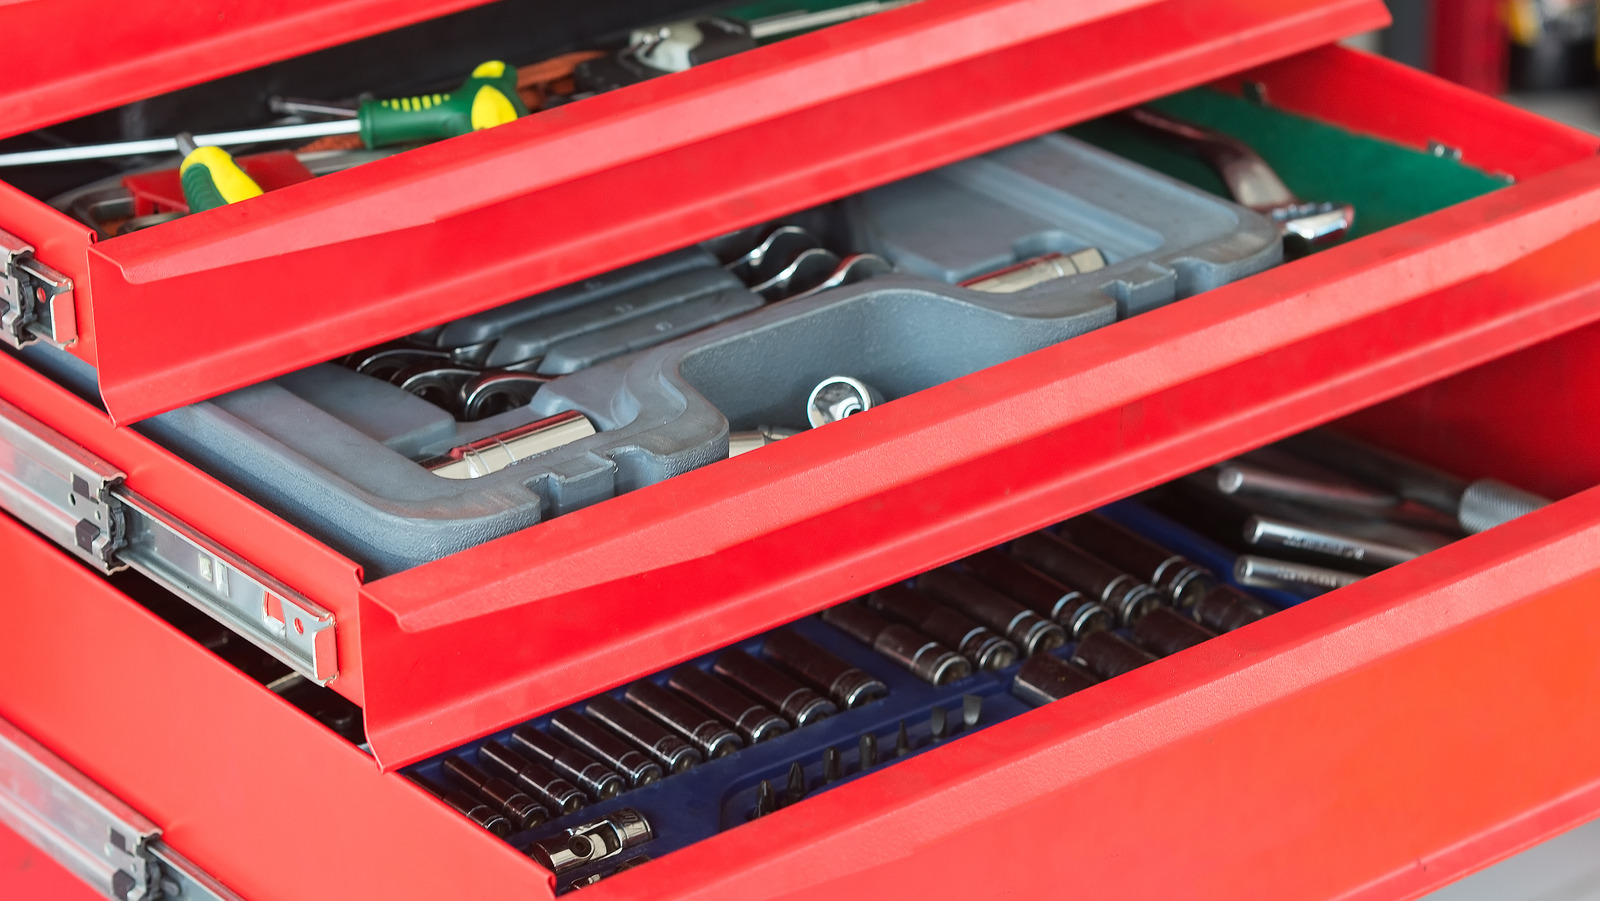 5 Of The Best Tool Storage Options At Harbor Freight Under 1 000